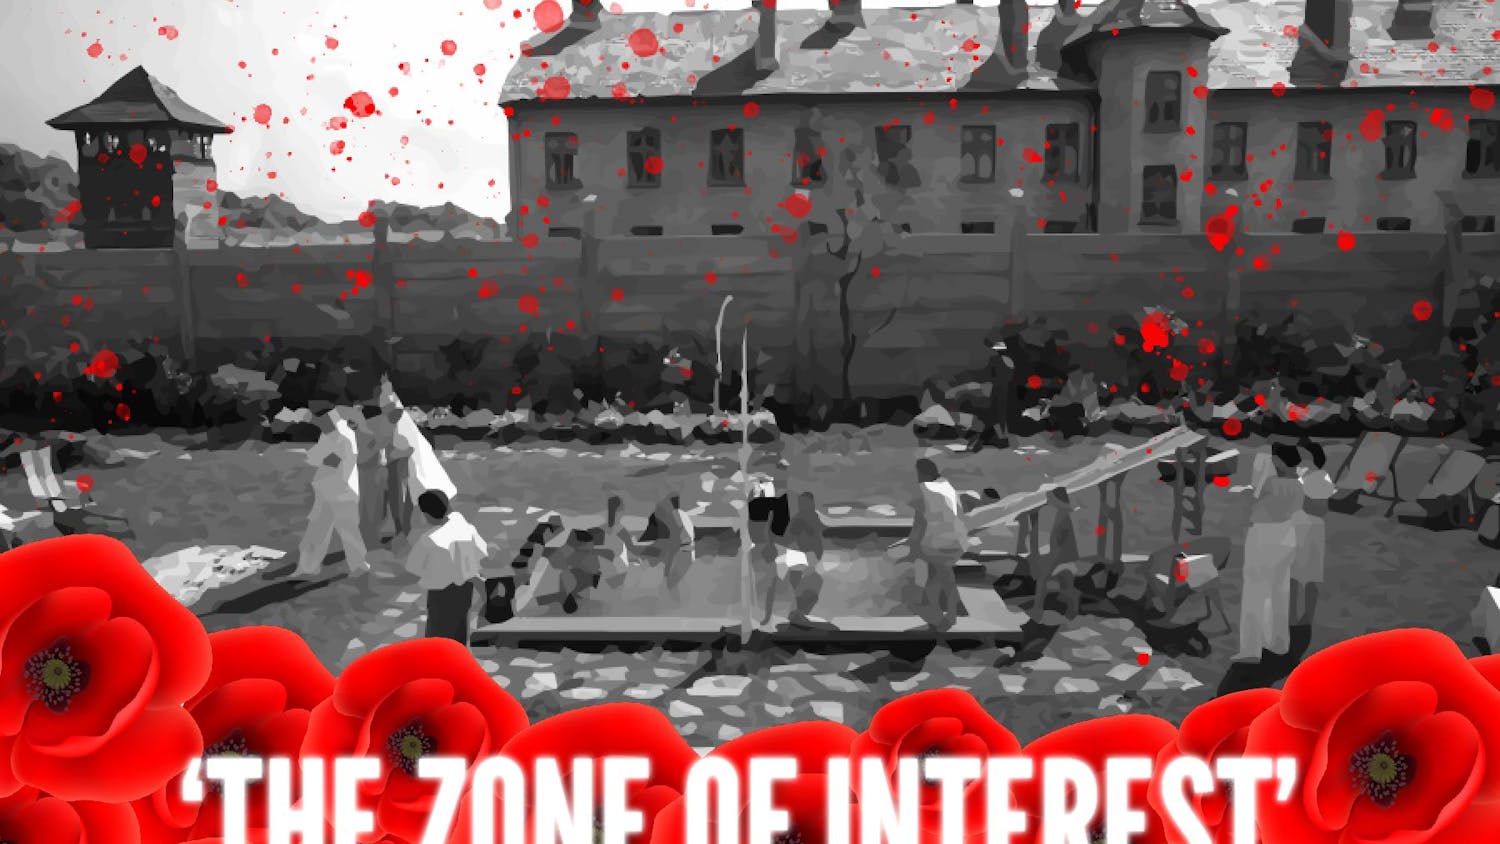 Chiang_Zone of Interest_Web